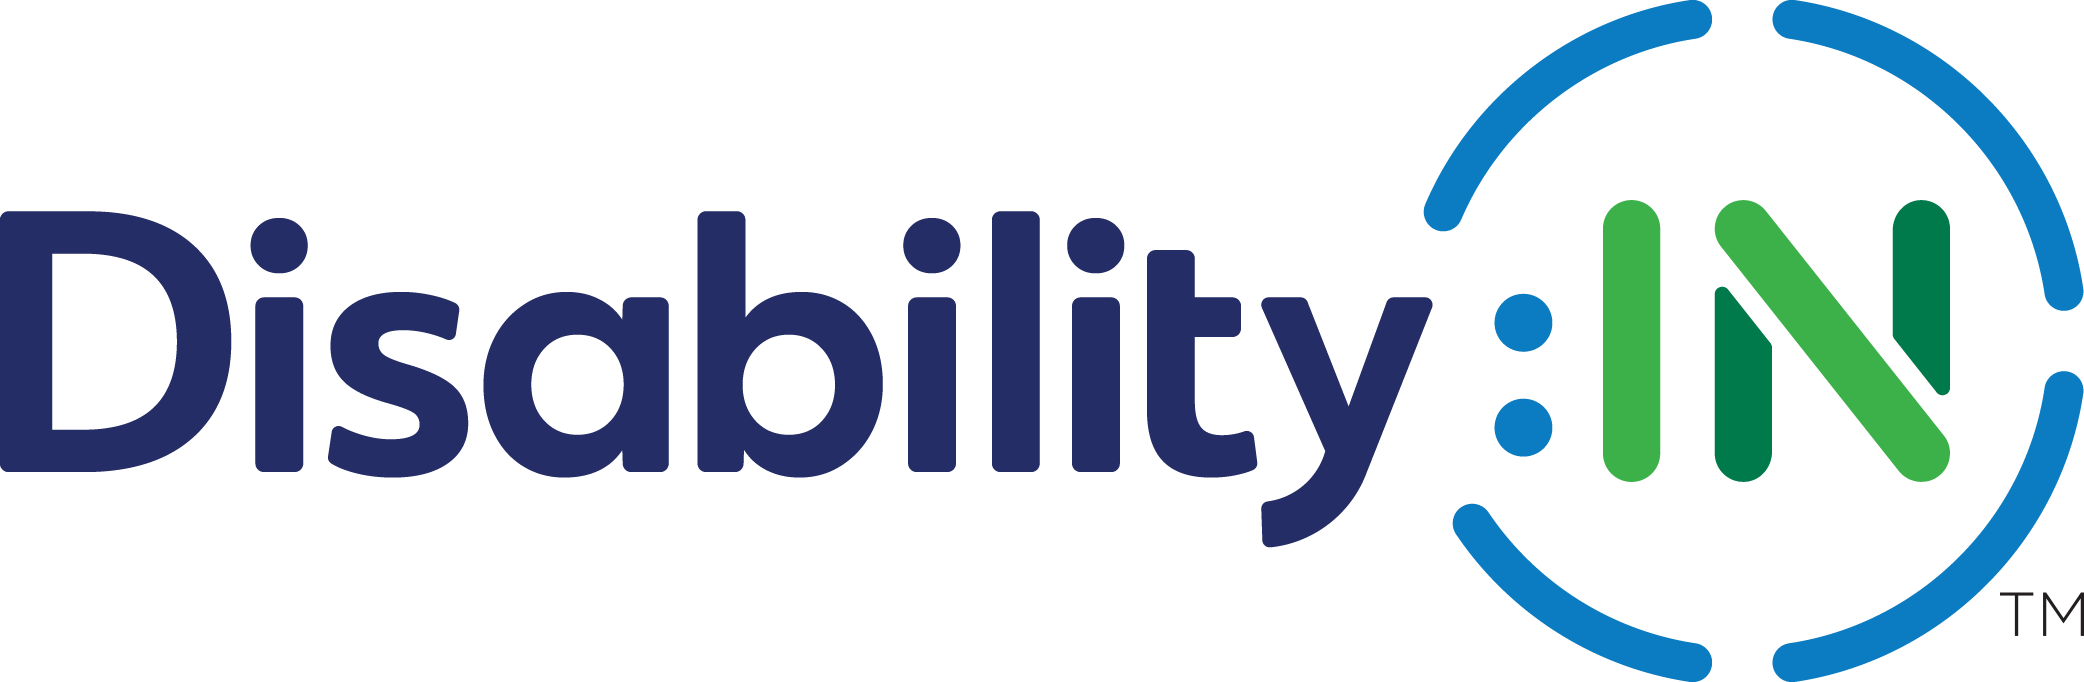 Disability:In logo